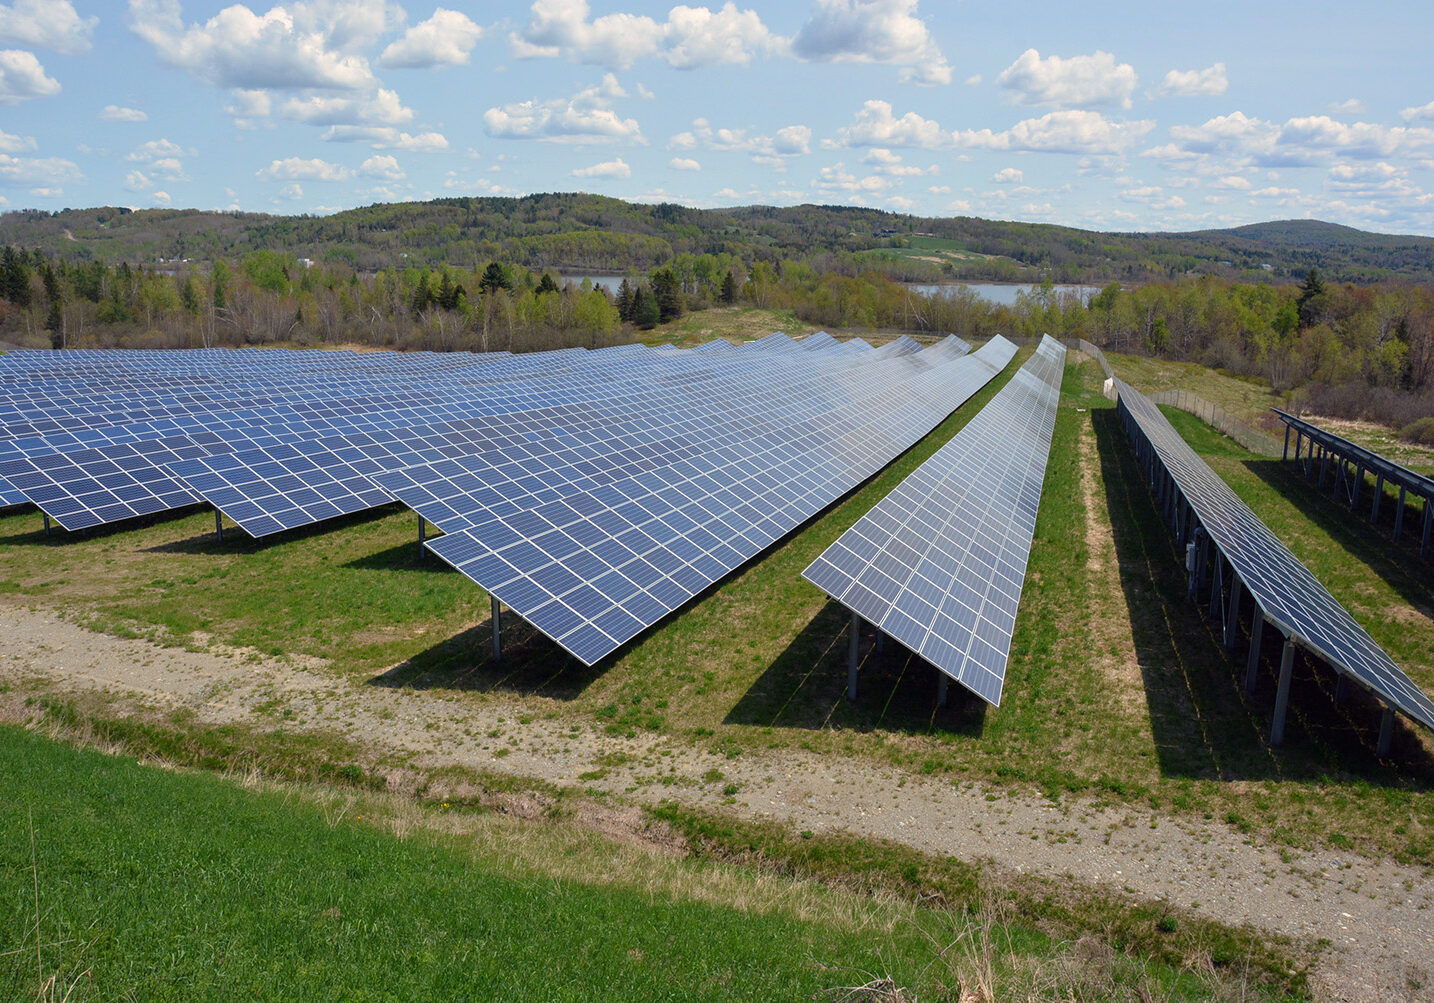 A solar array in Coventry, Vt. Photo by Angela Evancie for VPR